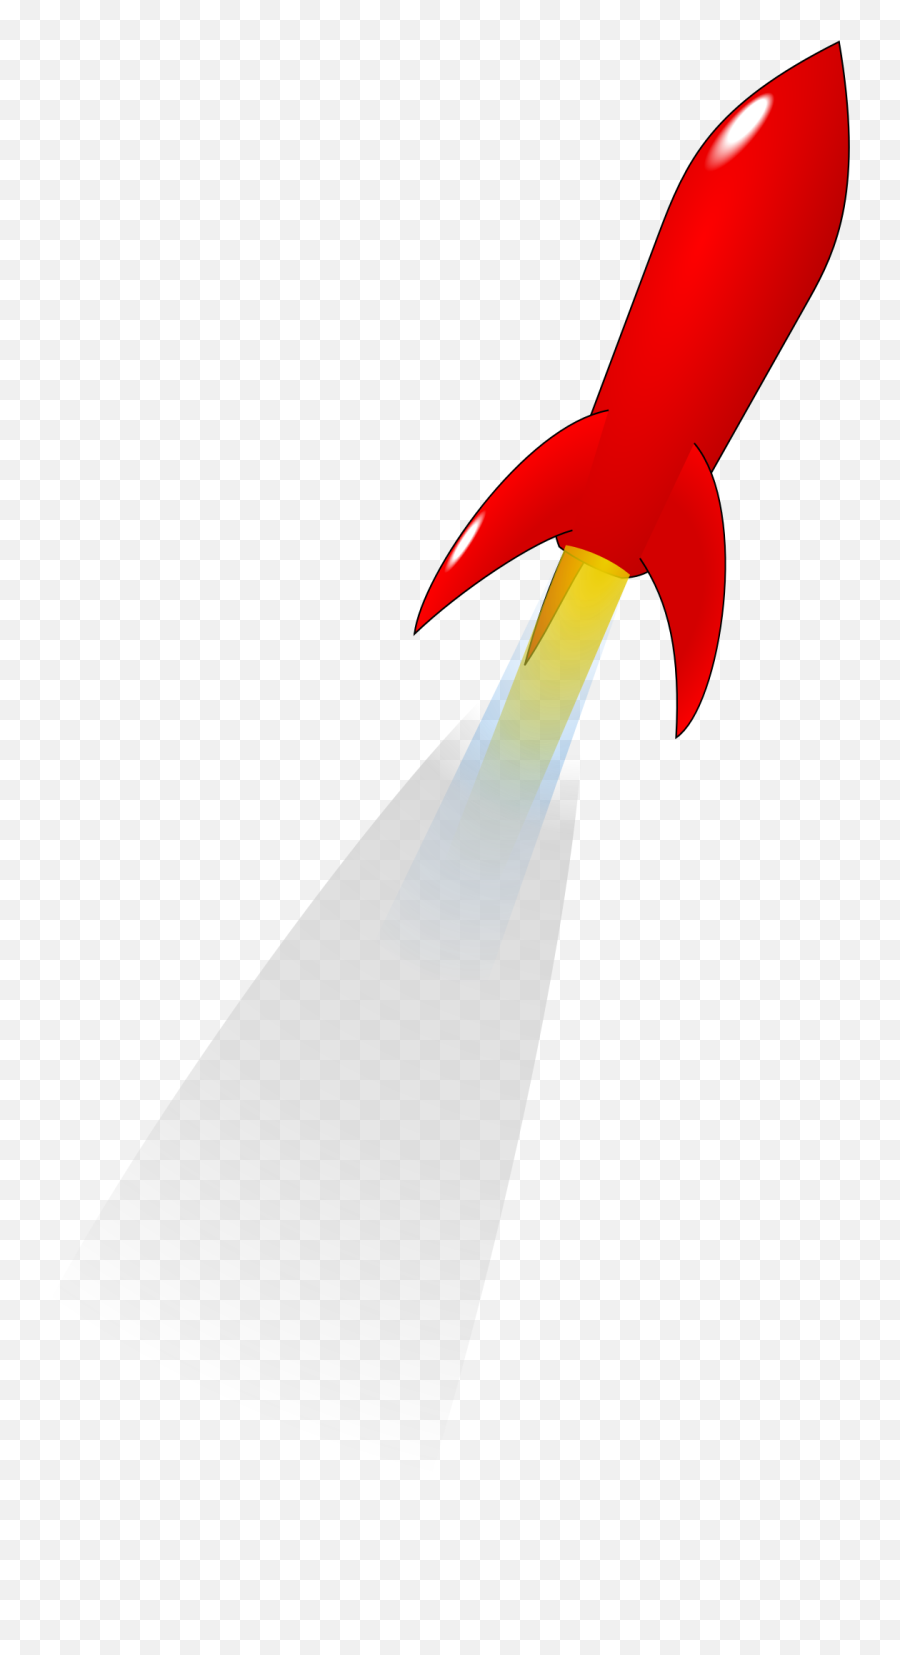 Launching Red Rocket Clipart - Rocket Gif Png Transparent,Rocket Clipart Png